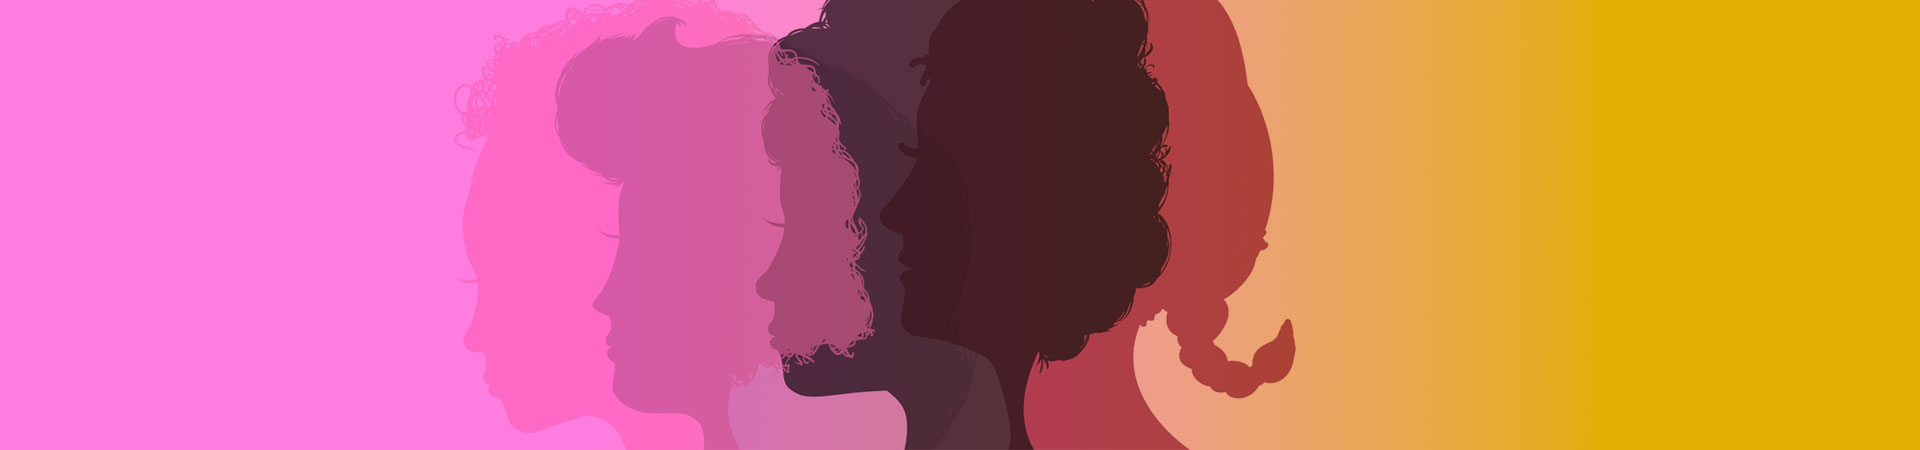  A gradient of pink to orange with different illustrated silhouettes of girls across it 